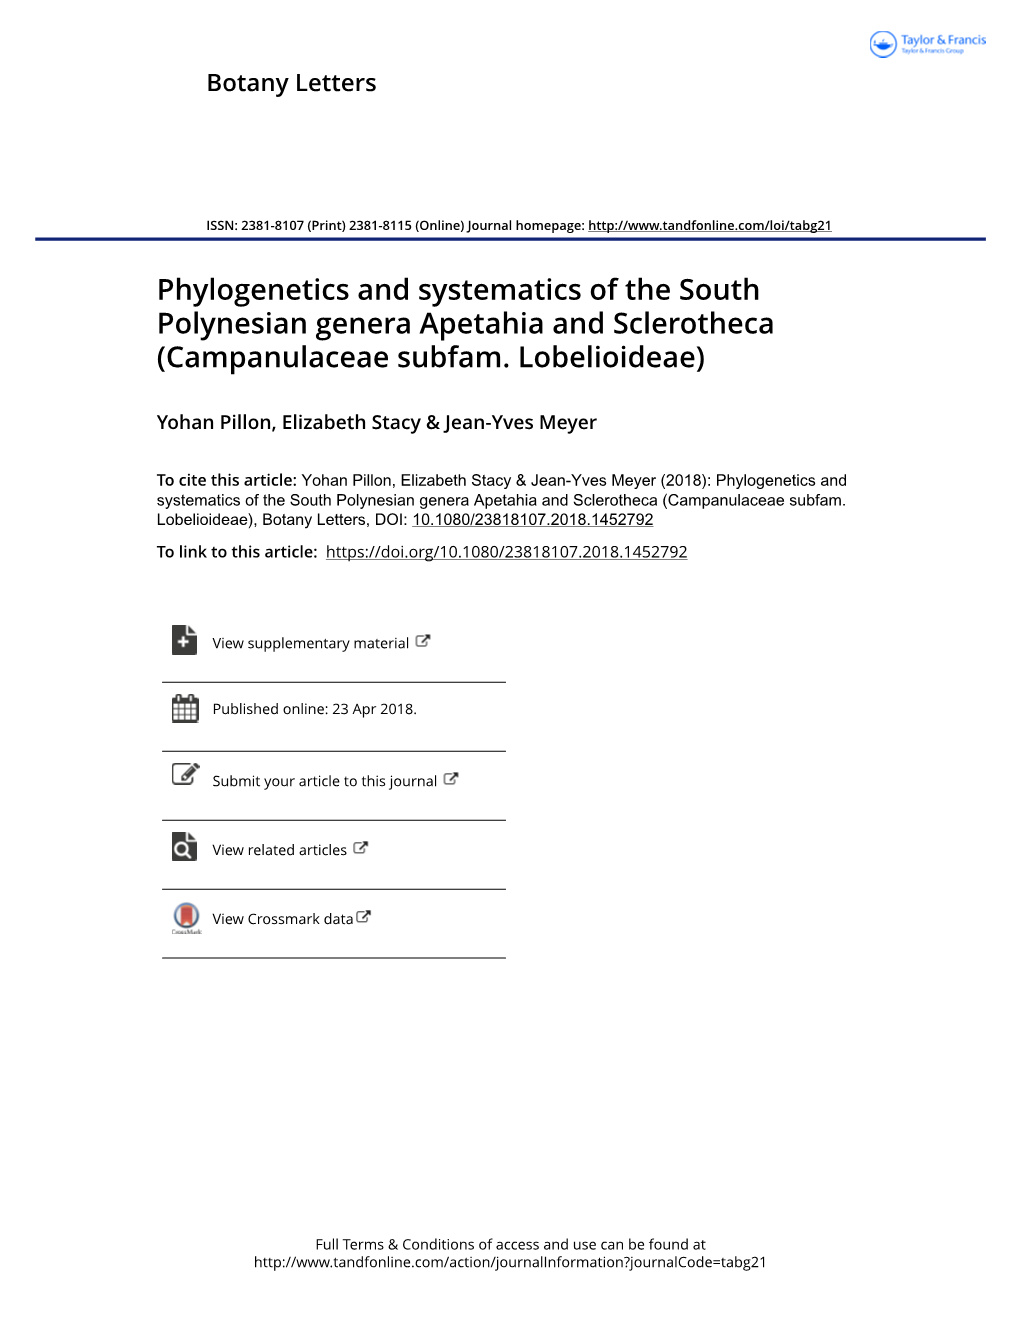 Phylogenetics and Systematics of the South Polynesian Genera Apetahia and Sclerotheca (Campanulaceae Subfam